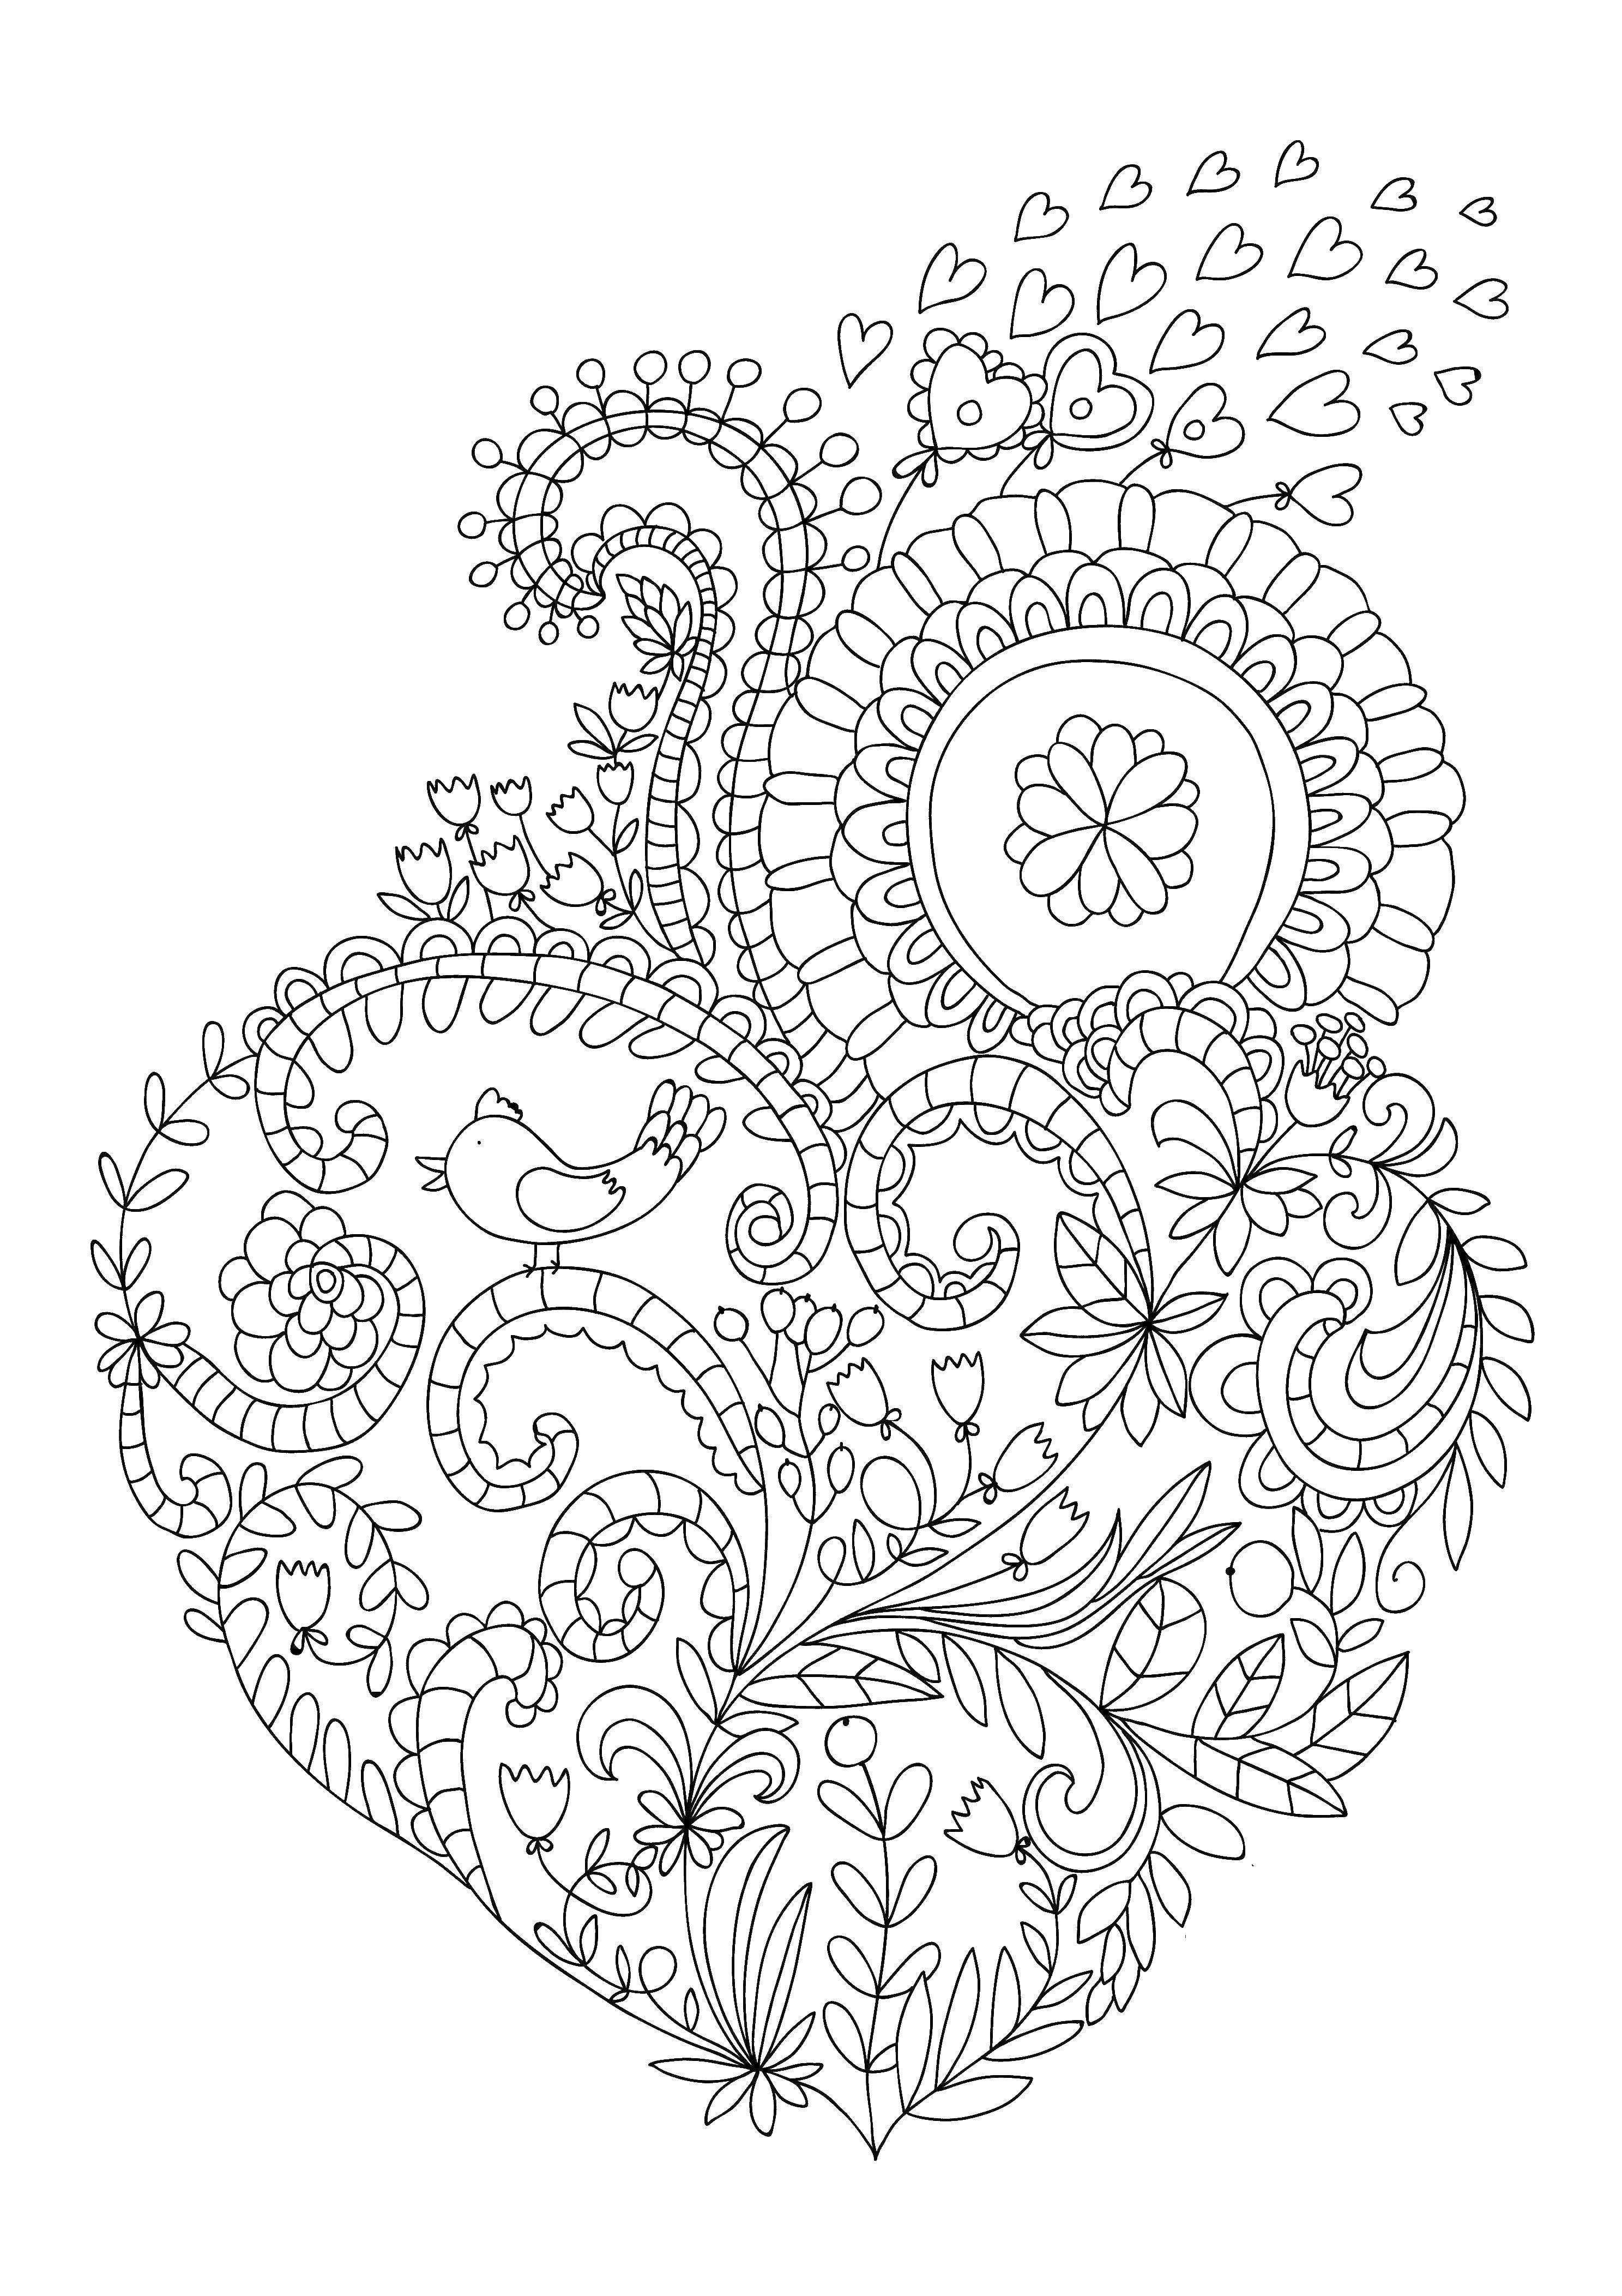 Coloring Beautiful pattern. Category patterns. Tags:  Patterns, hearts.